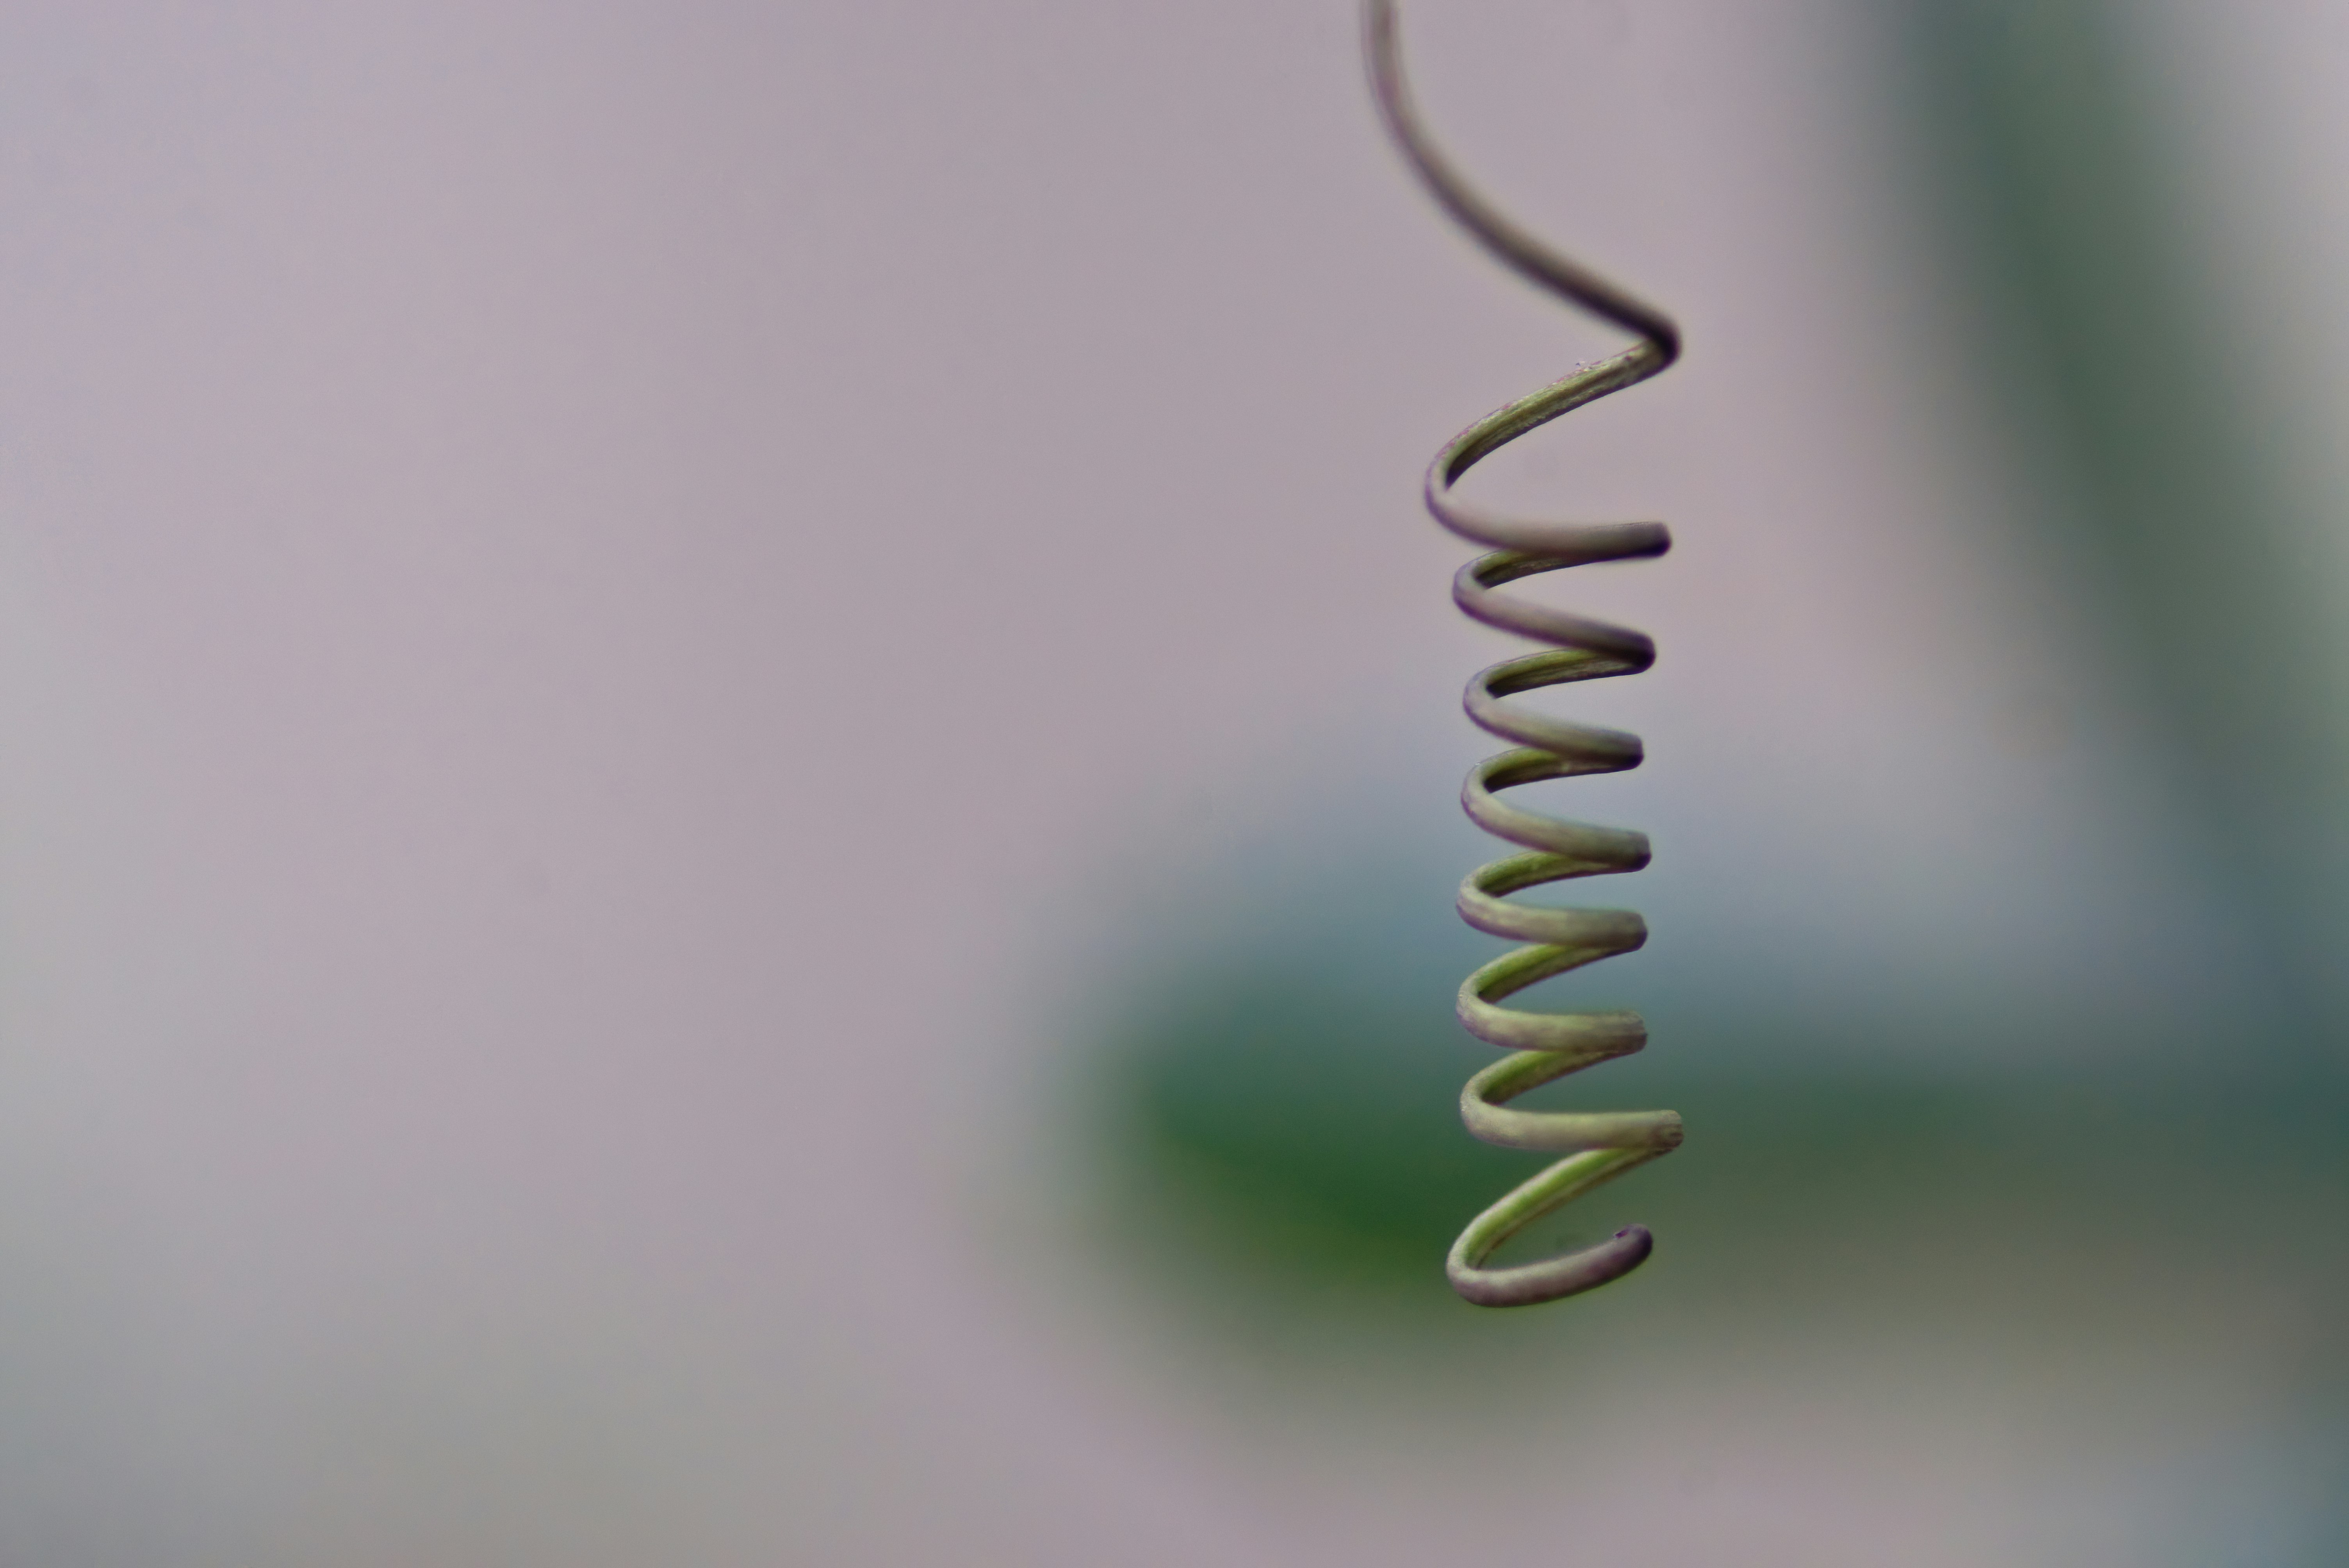 green spiral wire on white surface